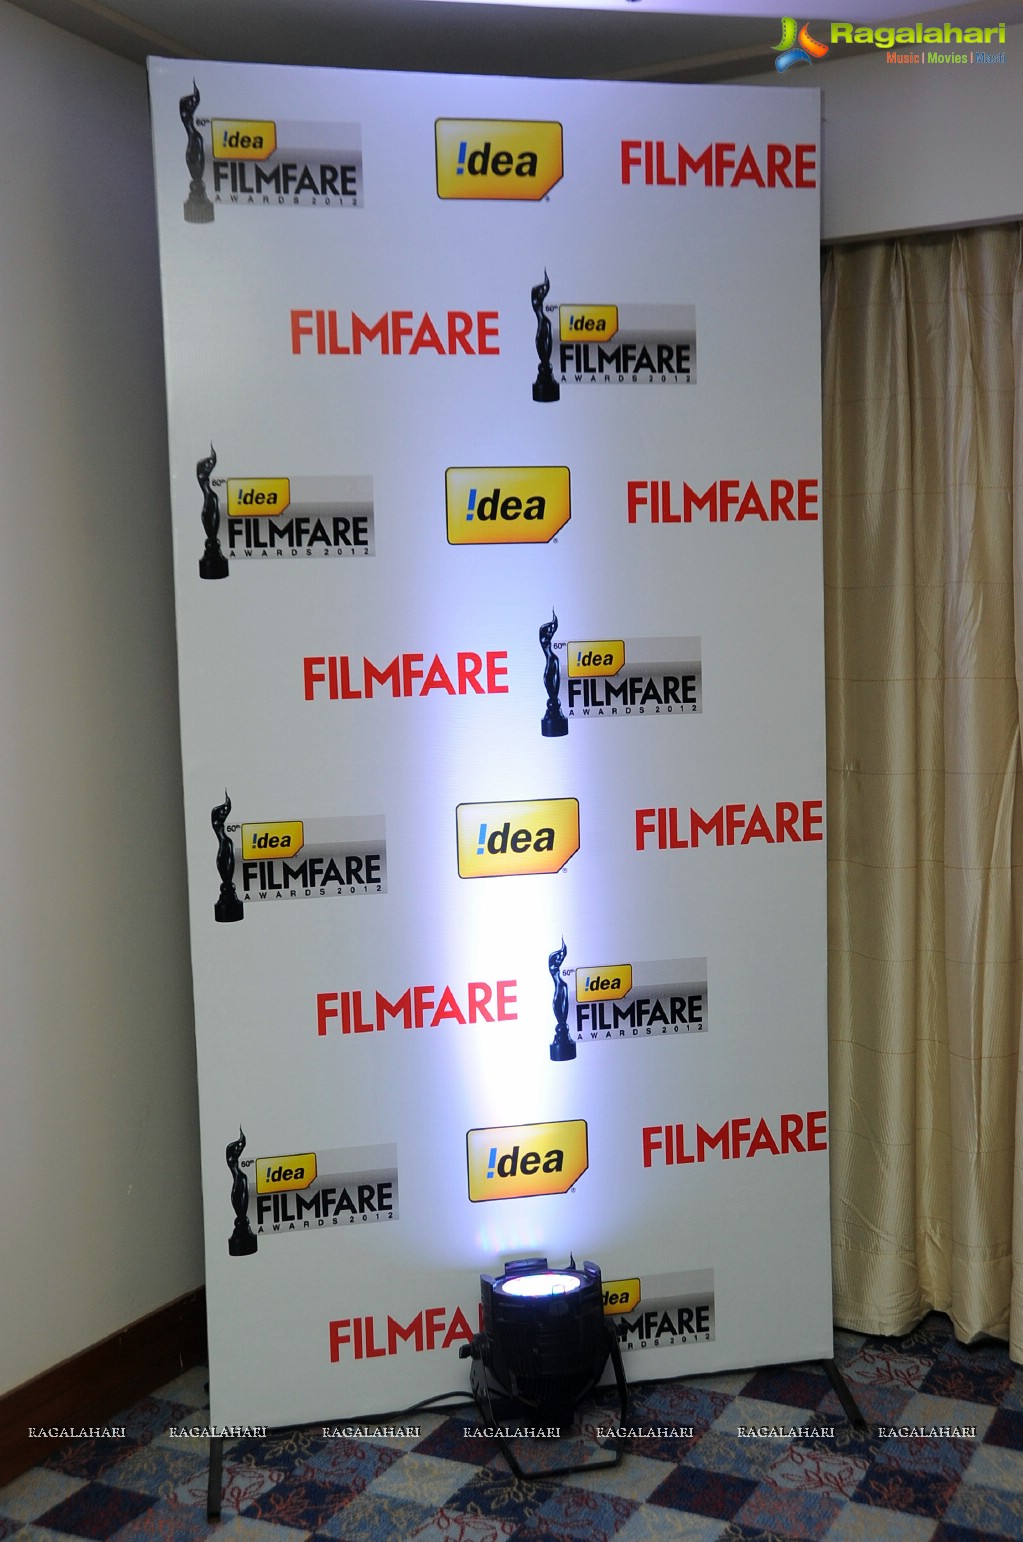 60th Idea Filmfare Awards (South) Press Conference with Samantha